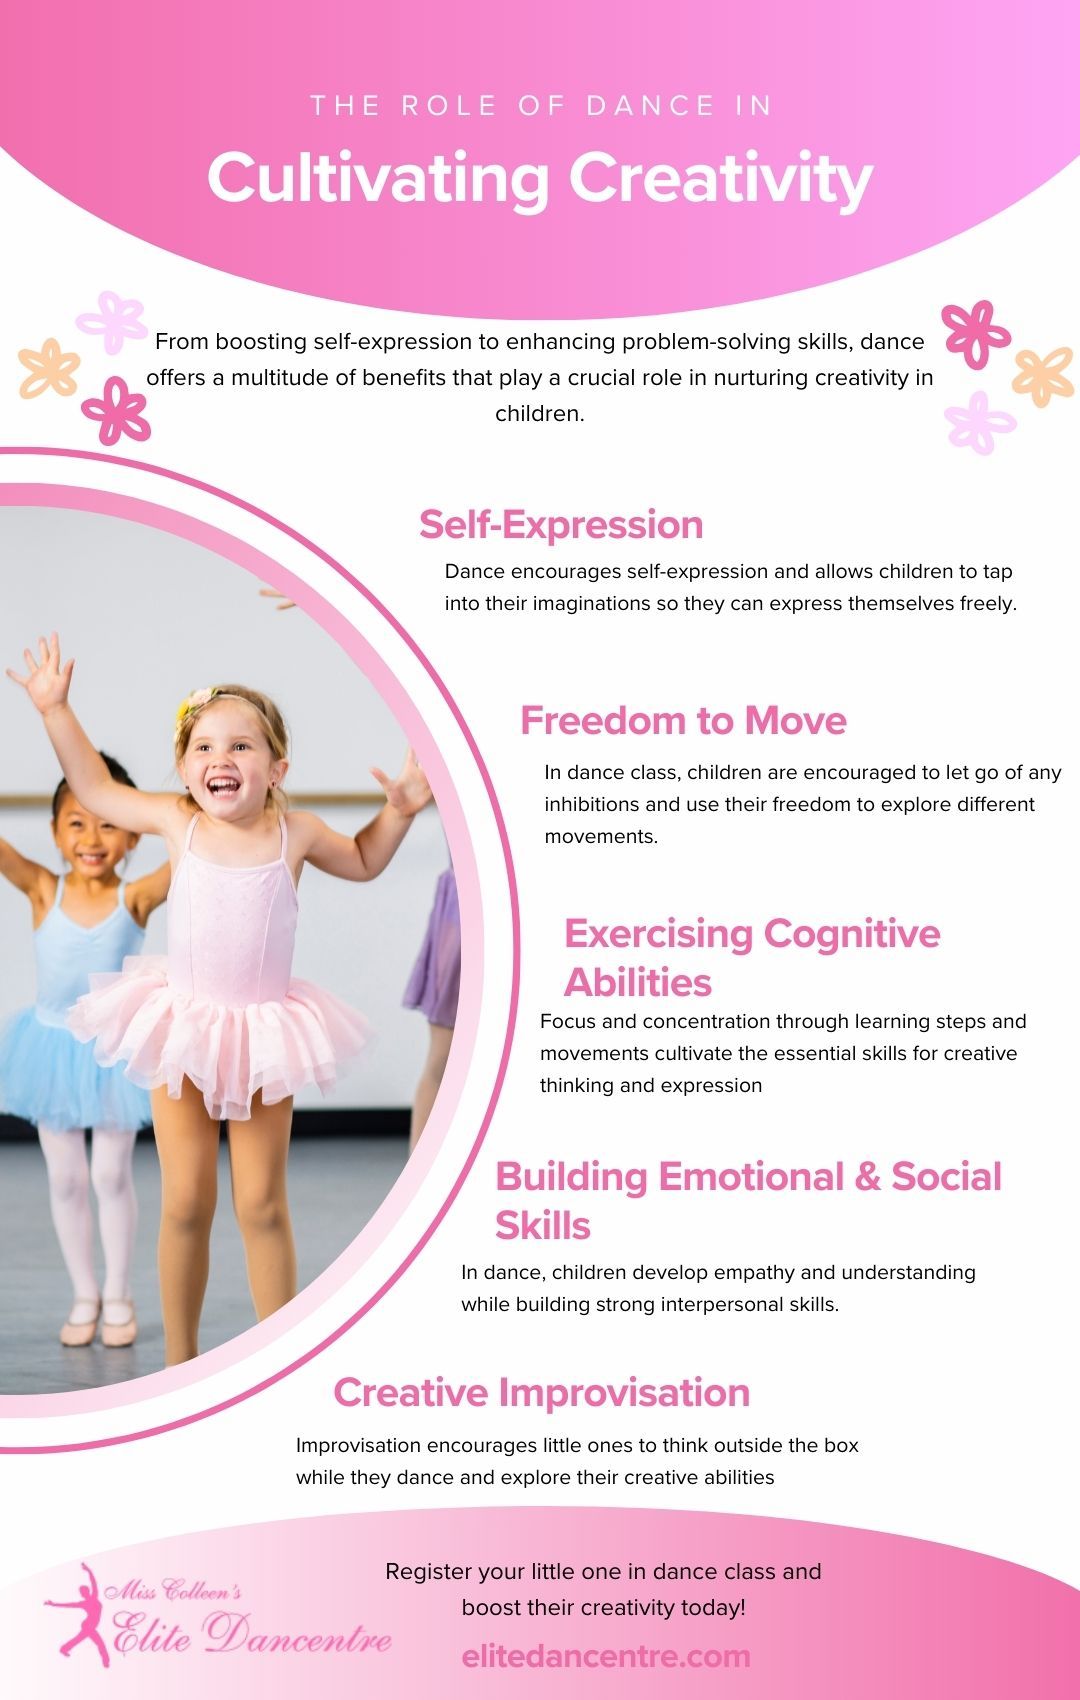 M13329 - The Role Of Dance In Cultivating Creativity In Children.jpg